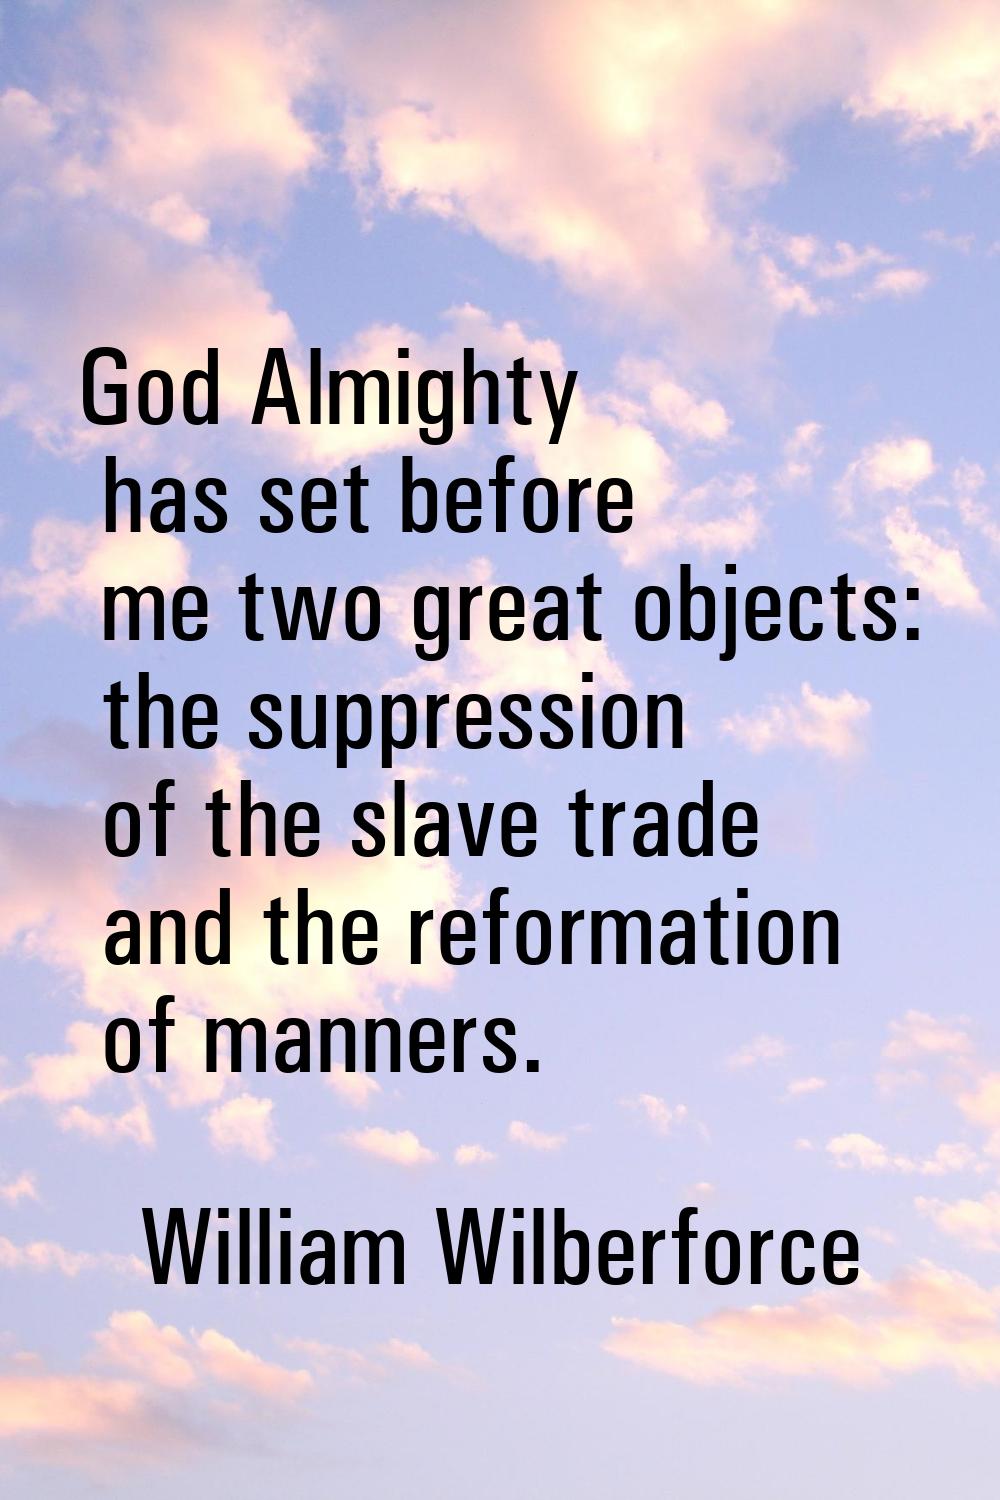 God Almighty has set before me two great objects: the suppression of the slave trade and the reform